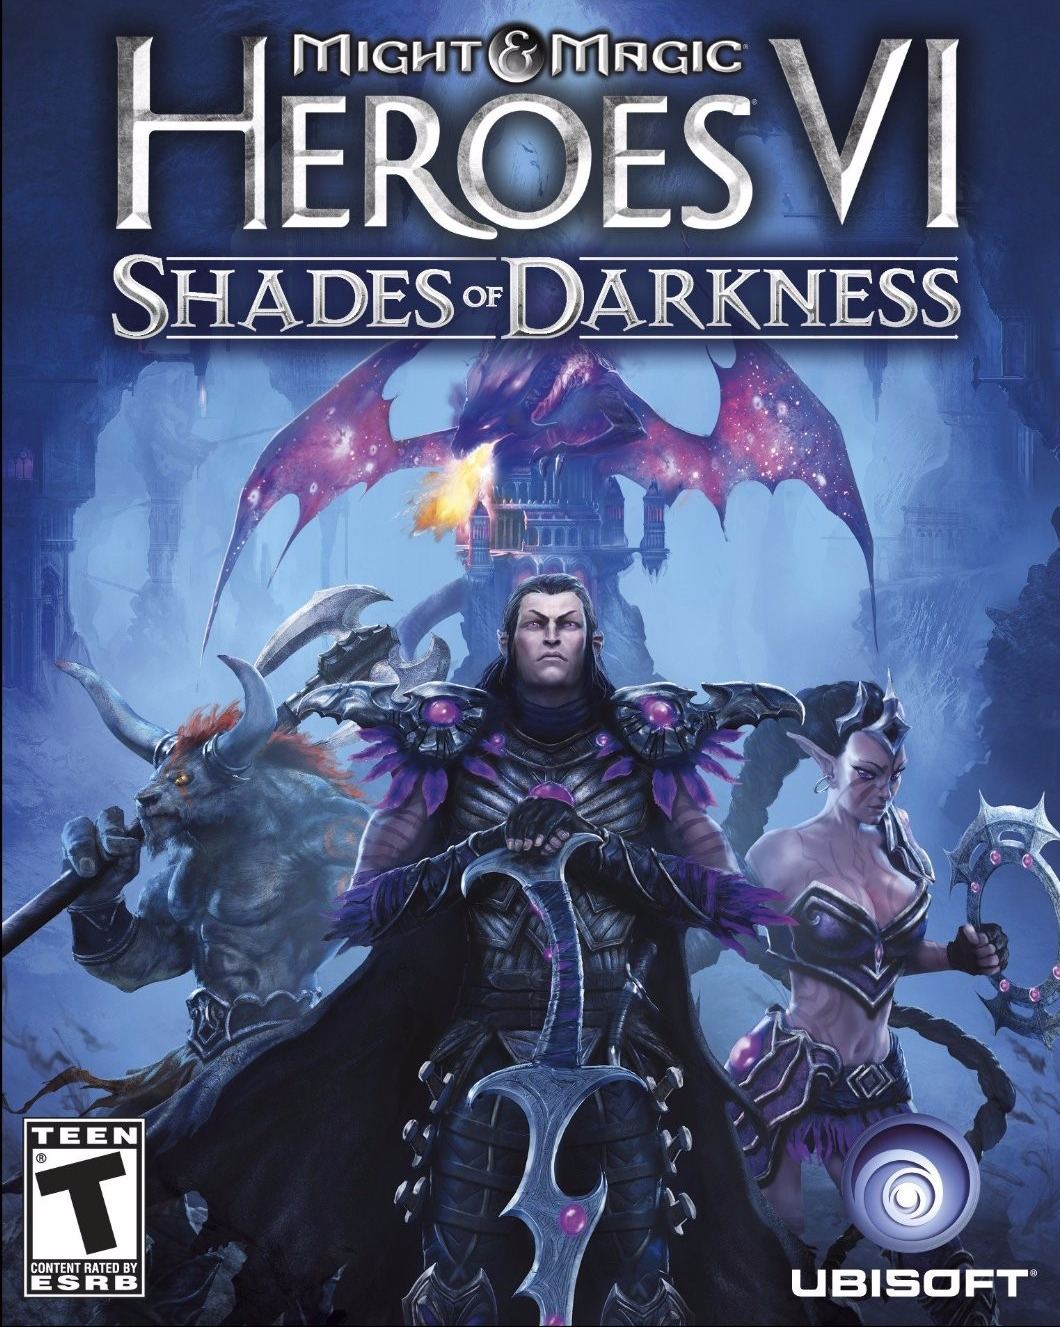 download heroes 6 shades of darkness